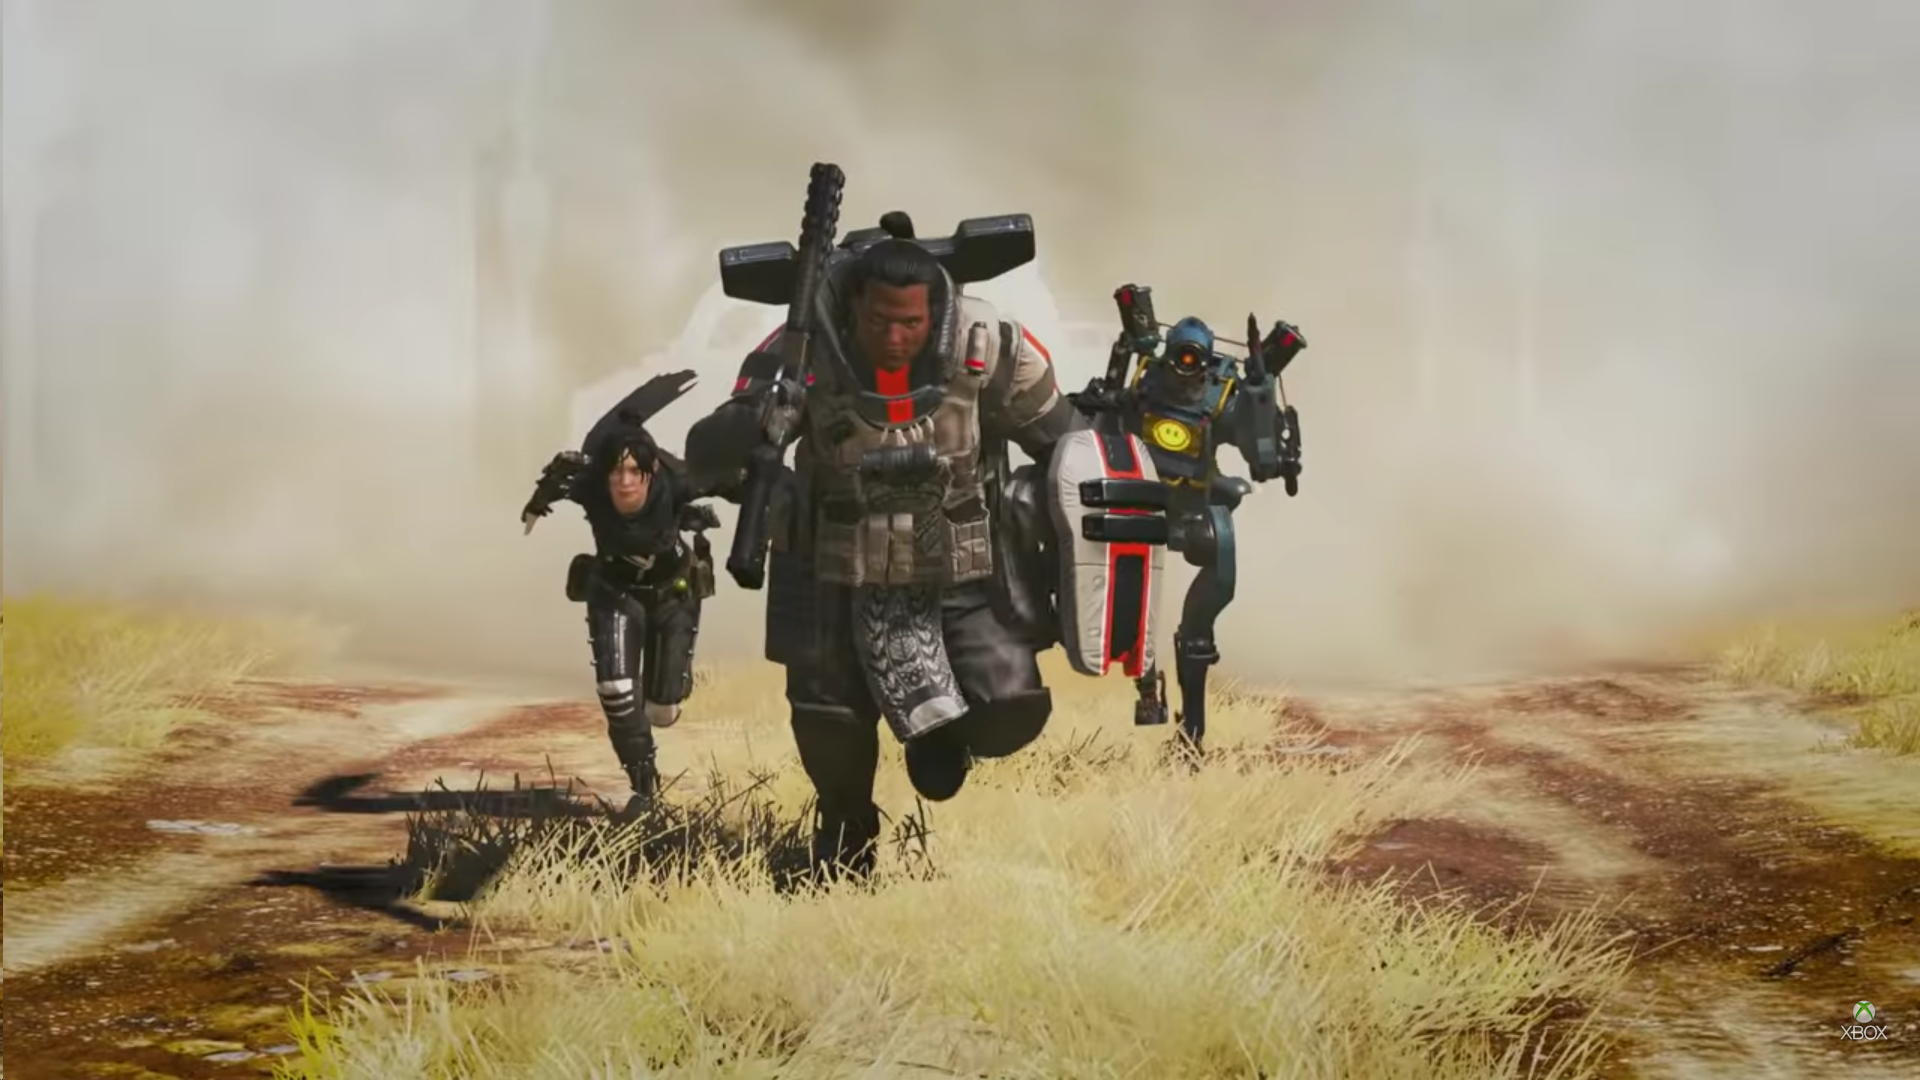 Apex Legends Data Miners Have Leaked Upcoming Characters And Abilities